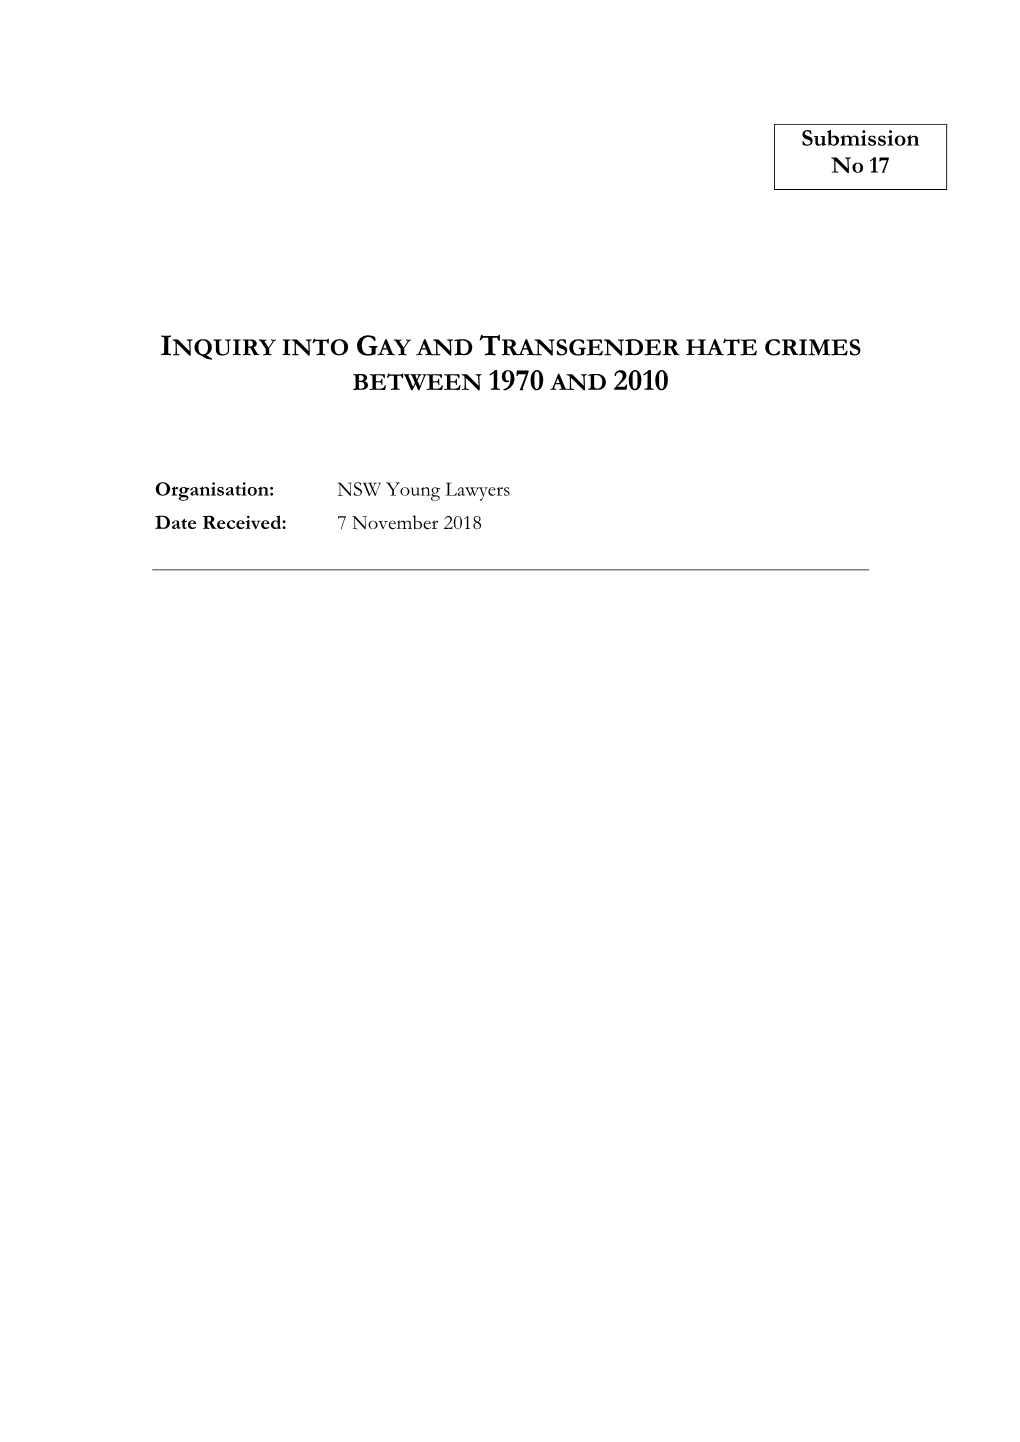 Inquiry Into Gay and Transgender Hate Crimes Between 1970 and 2010